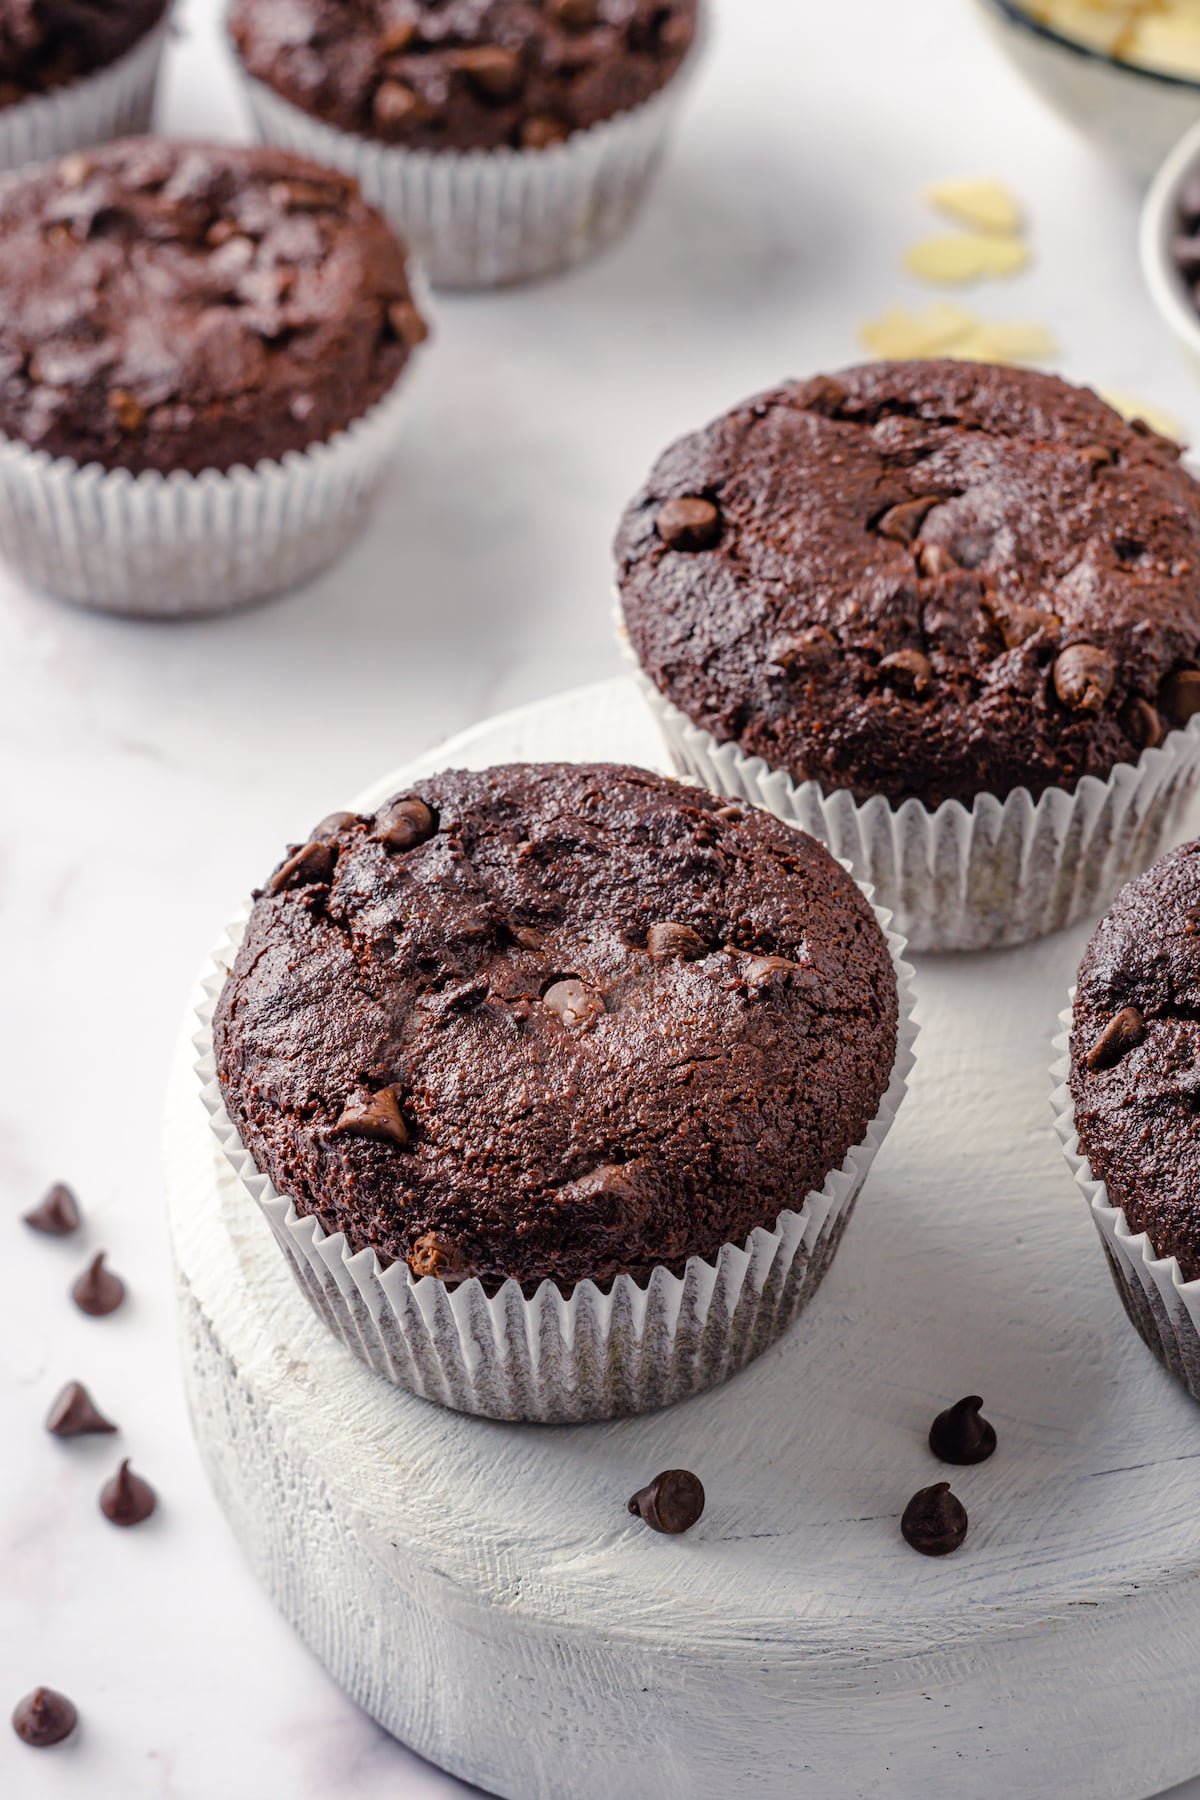 How to Make Gluten-Free Double Chocolate Muffins